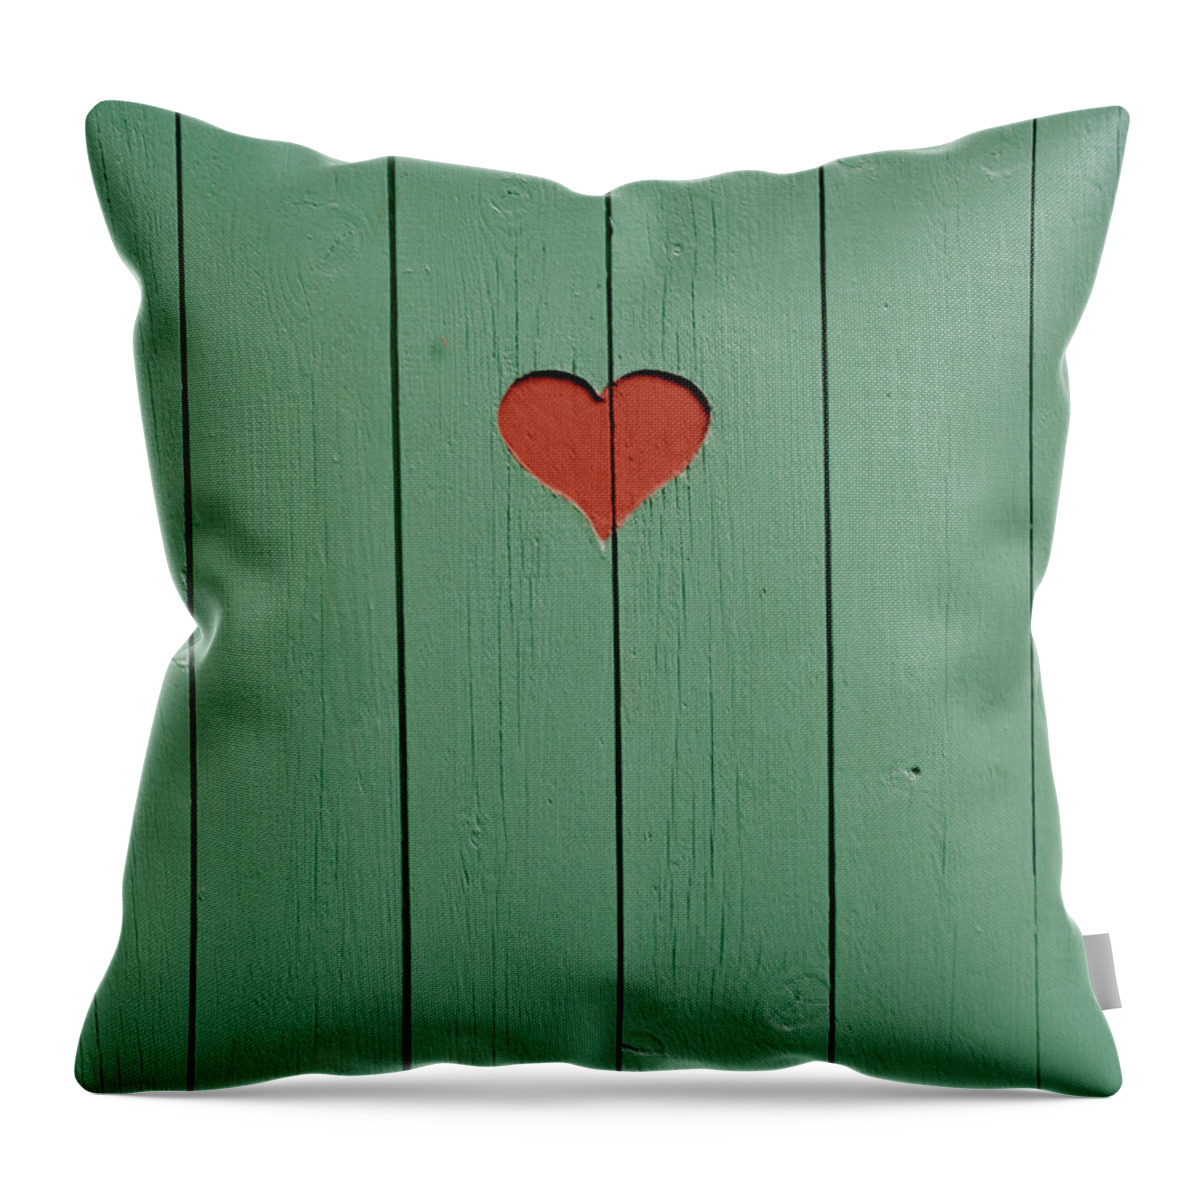 Outhouse Throw Pillow featuring the photograph The Door To A Outhouse by Fredrik Nyman